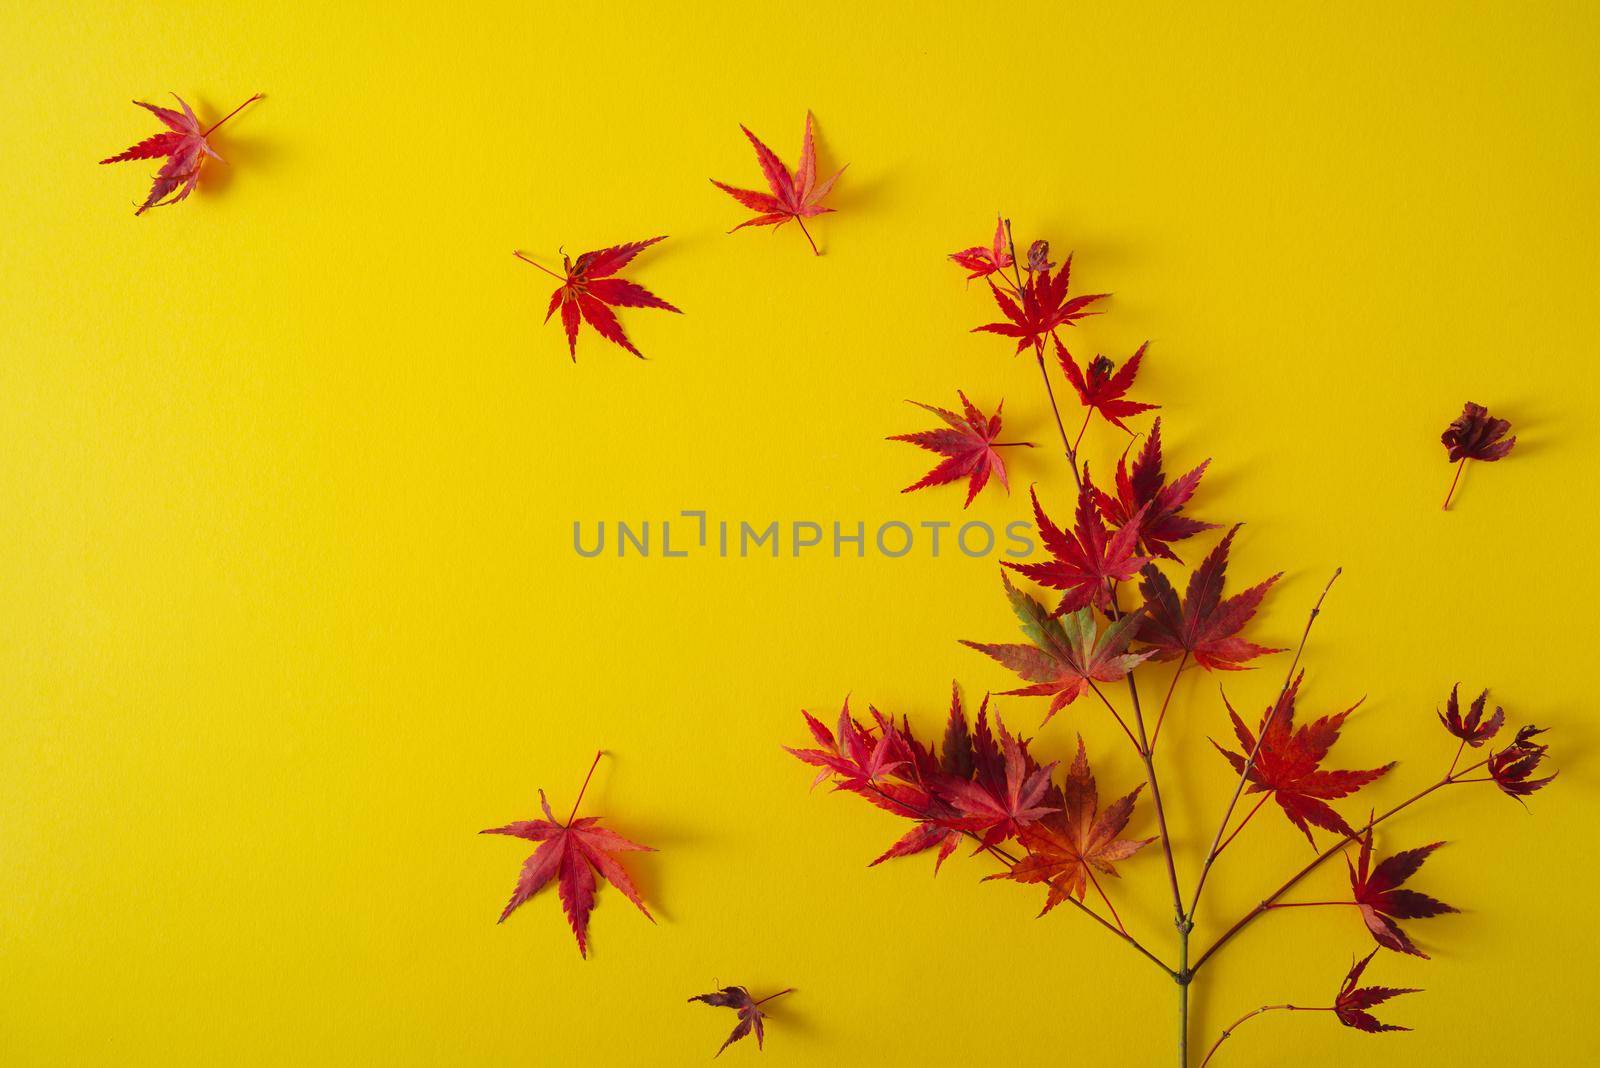 outumn bright leaves on yellow background by maramorosz